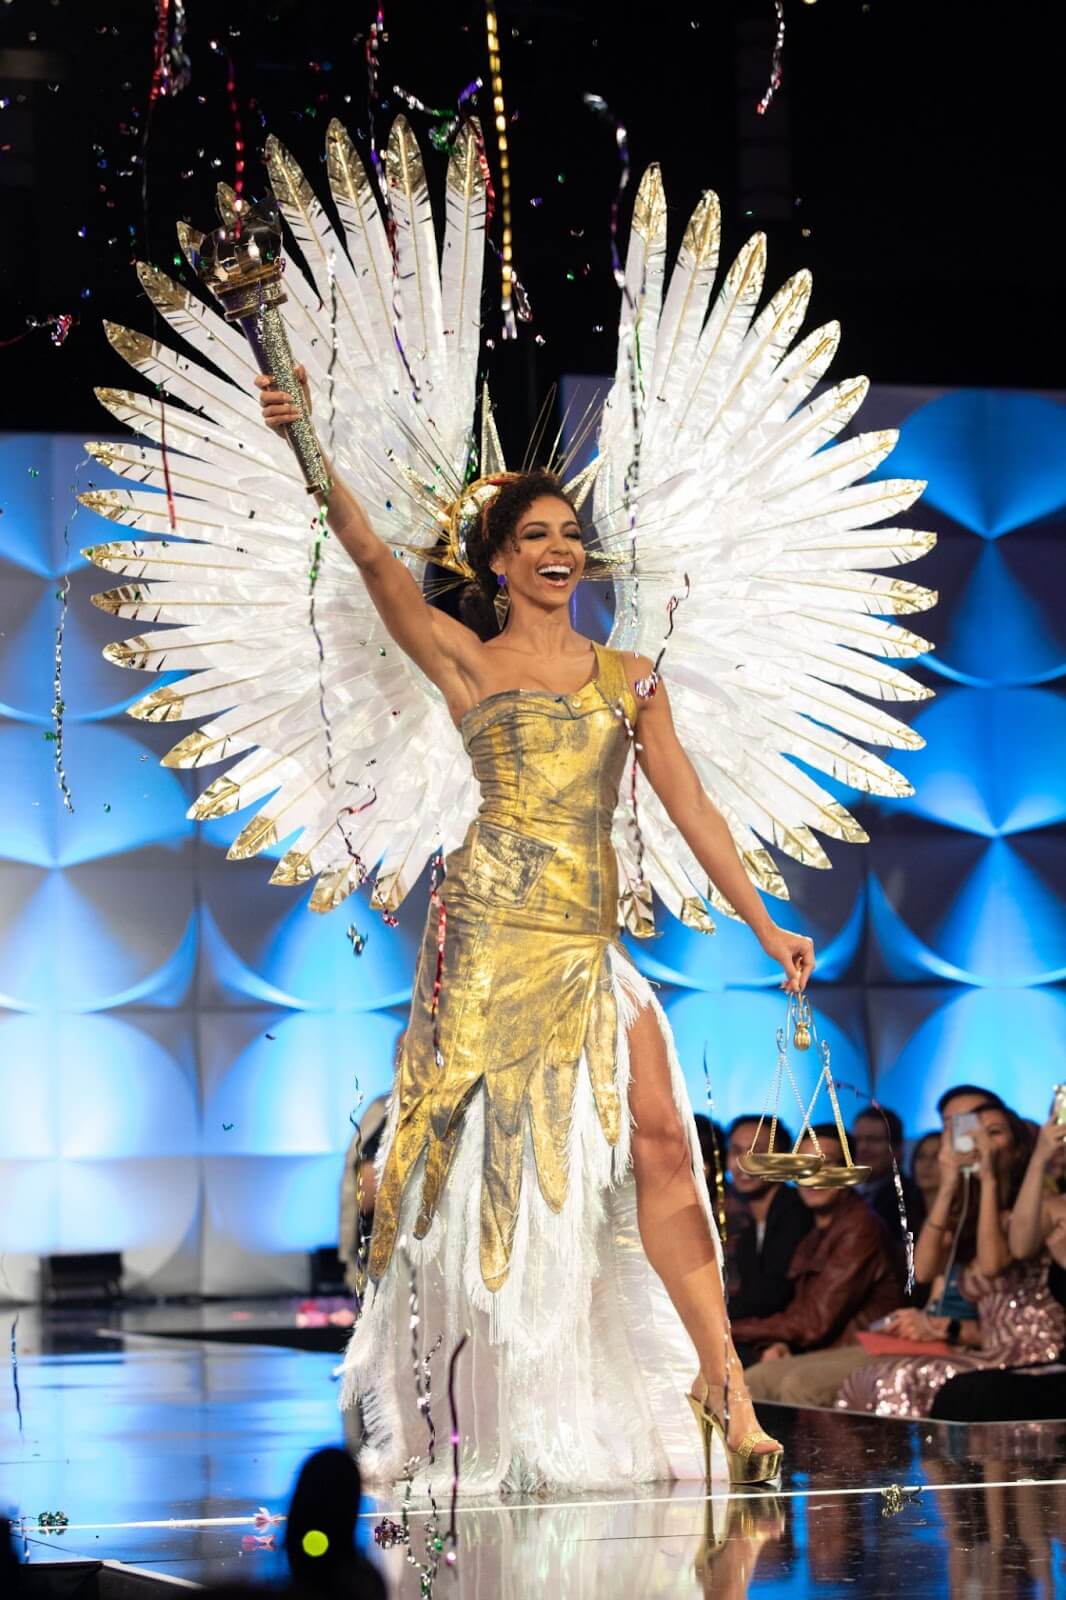 Cheslie Kryst in her national costume at the 2019 Miss Universe competition